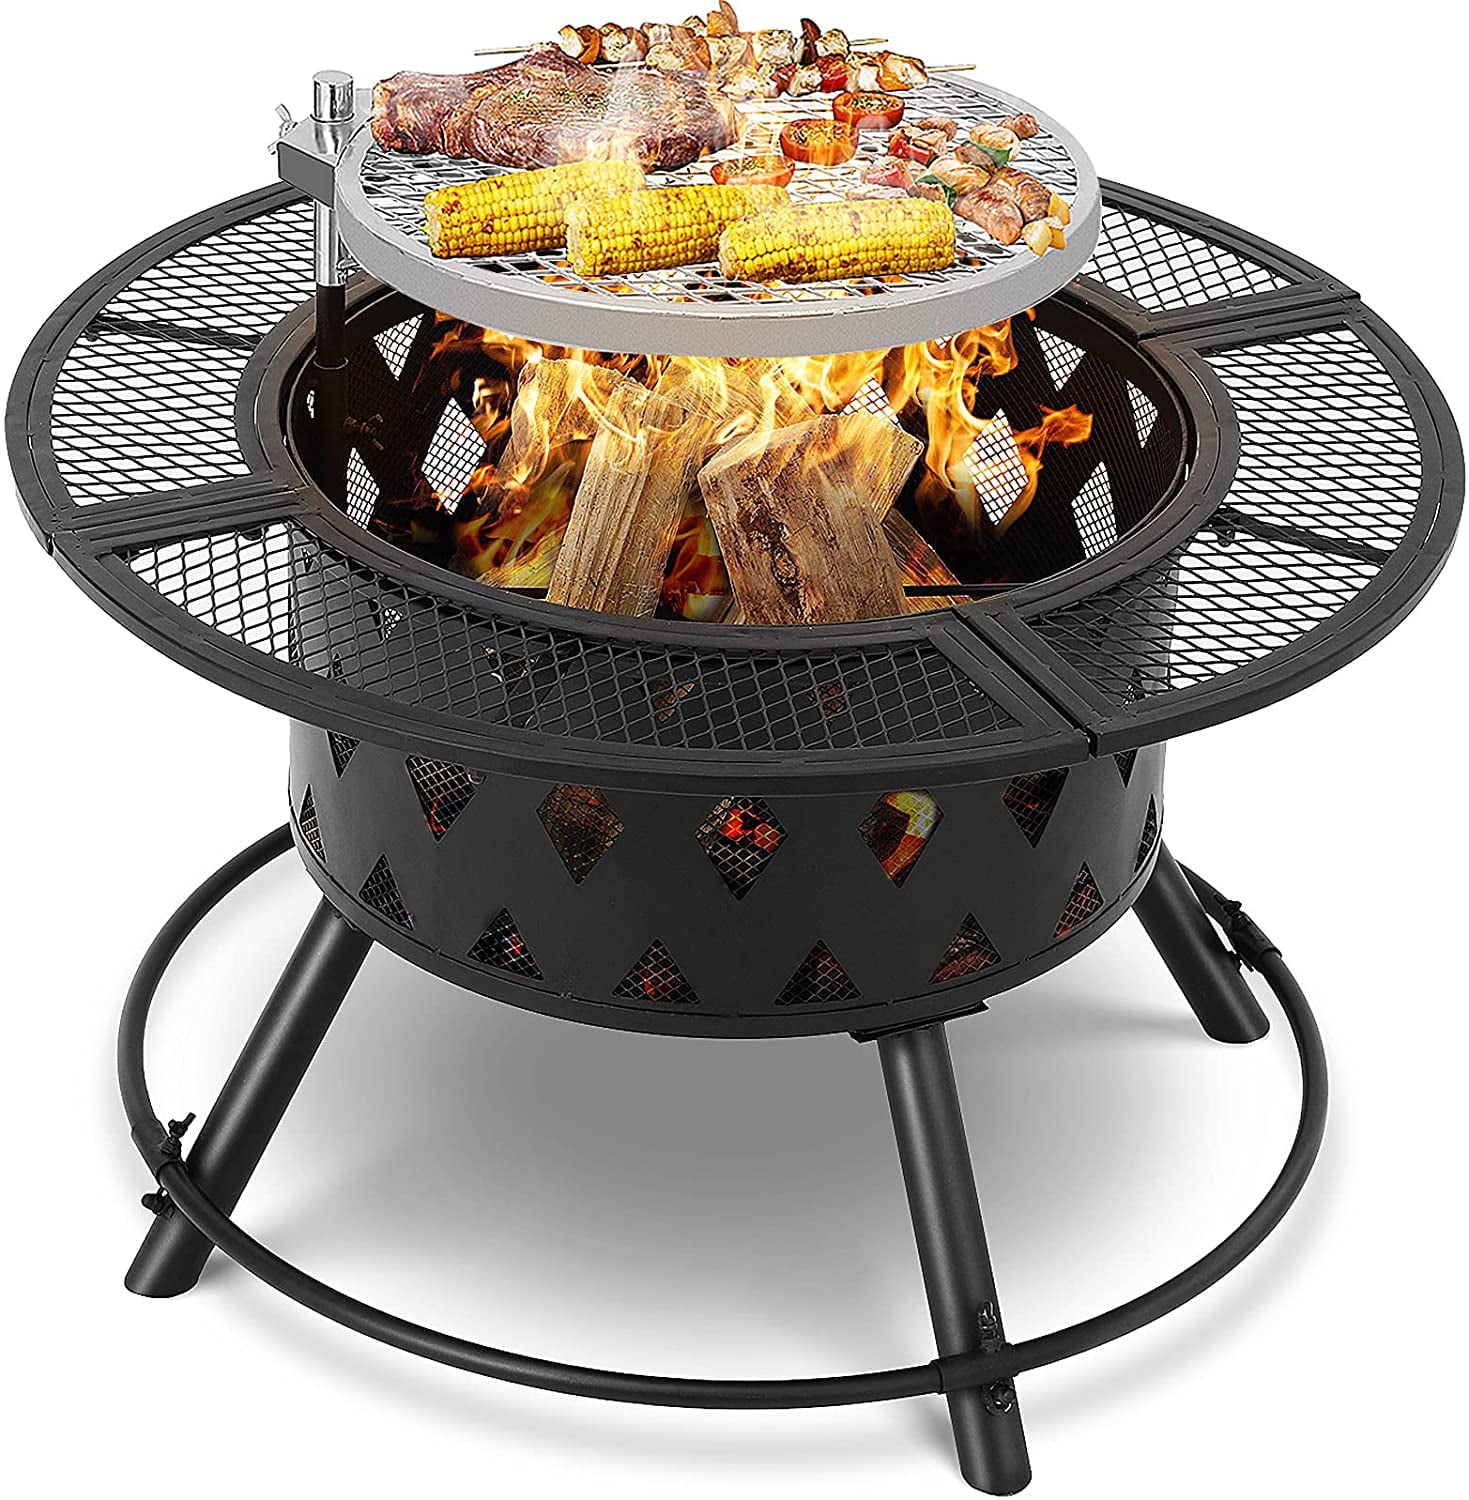 Gartio 36 Wood Burning Fire Pit Bowl, Cowboy Fire Pit Grill